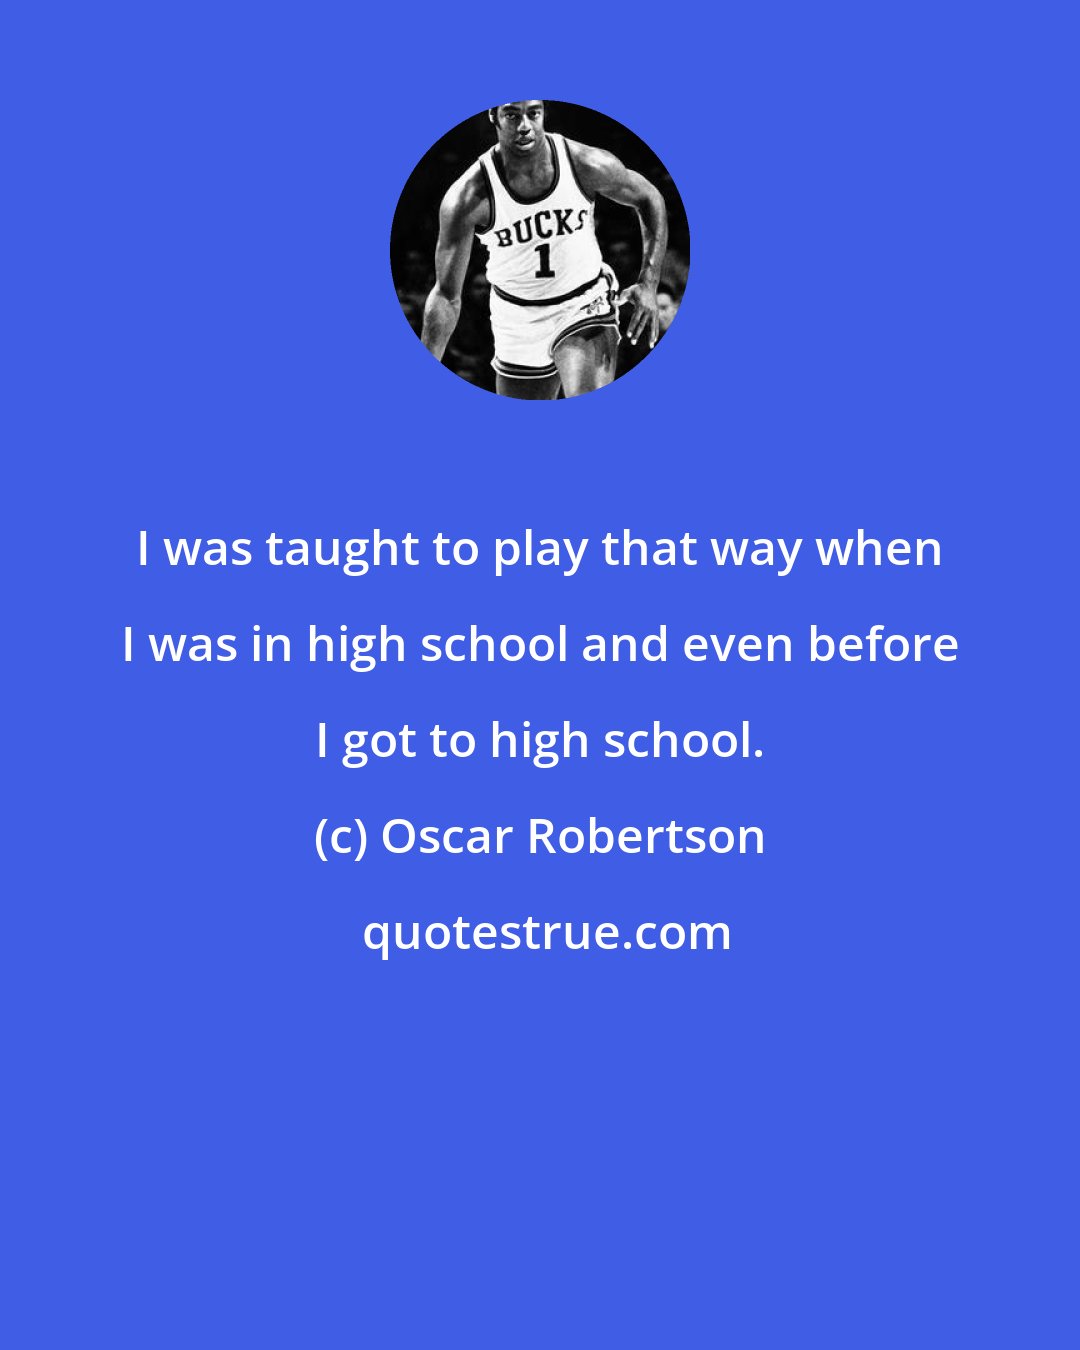 Oscar Robertson: I was taught to play that way when I was in high school and even before I got to high school.